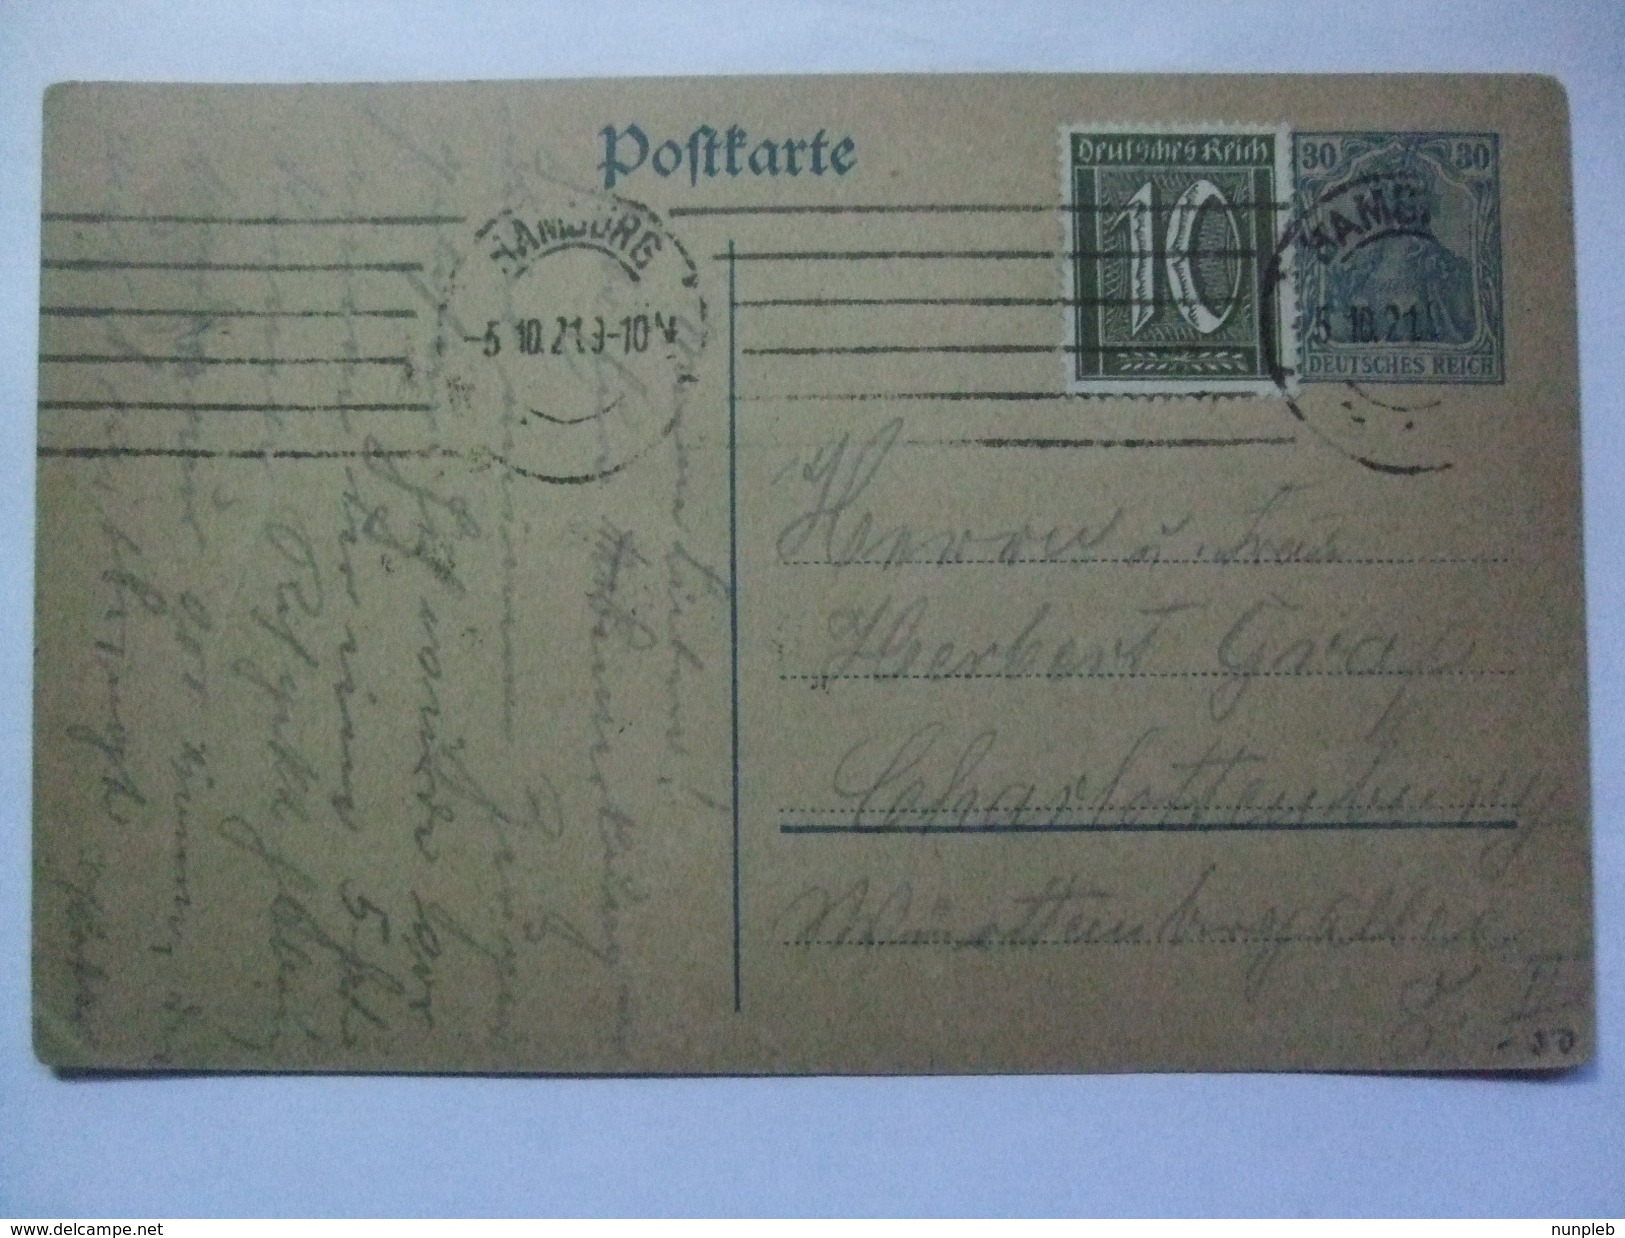 GERMANY - Inflation Period Postcard - 1921 - Hamburg To Charlottenberg - 40pf Rate - Covers & Documents